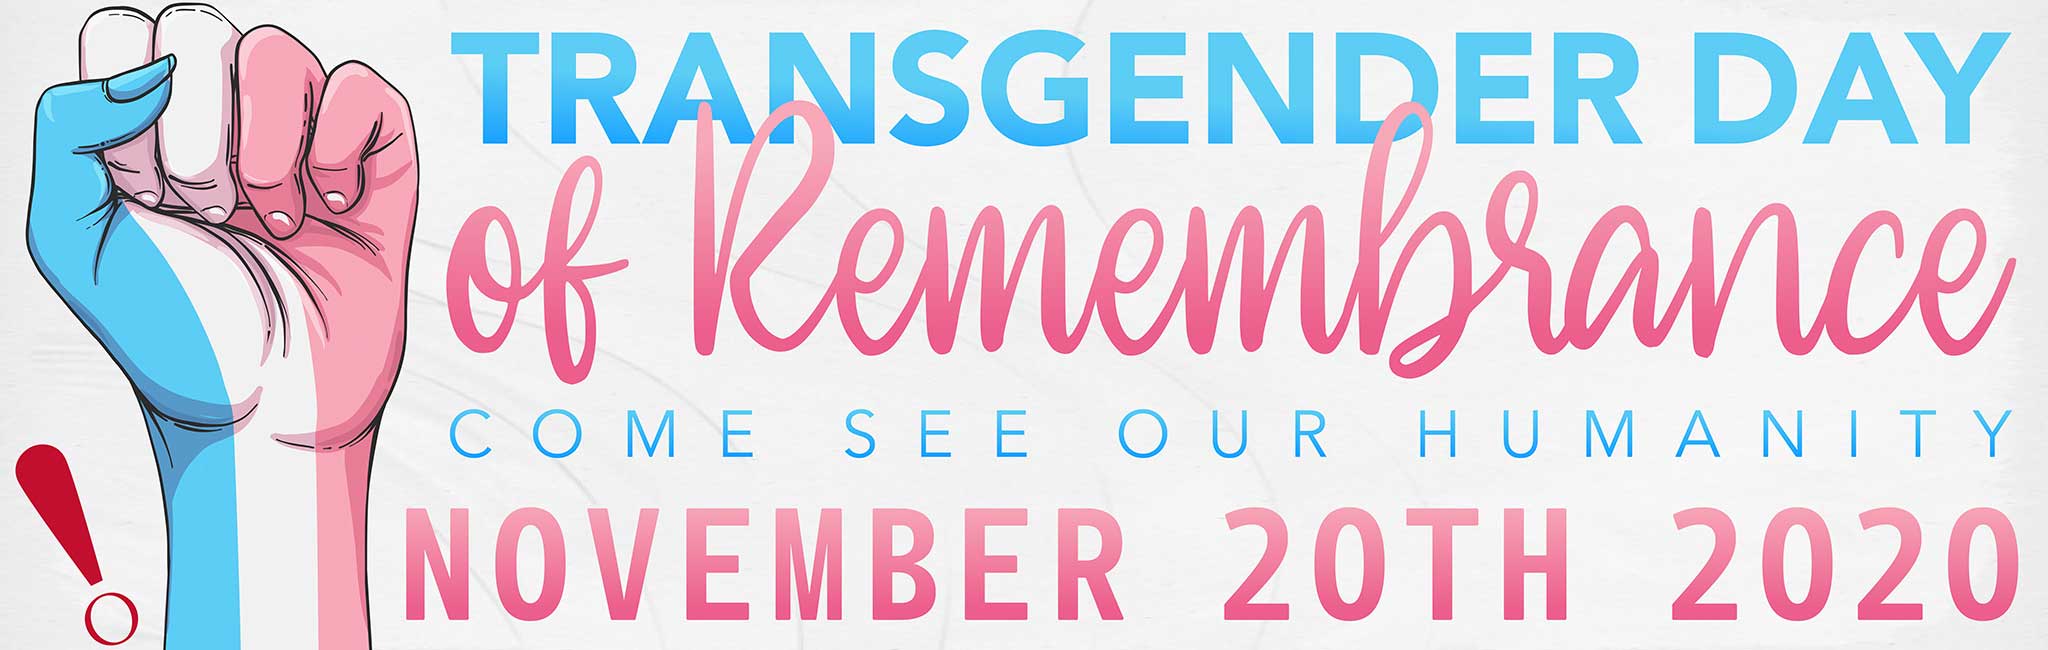 Transgender Day of Remembrance OSF